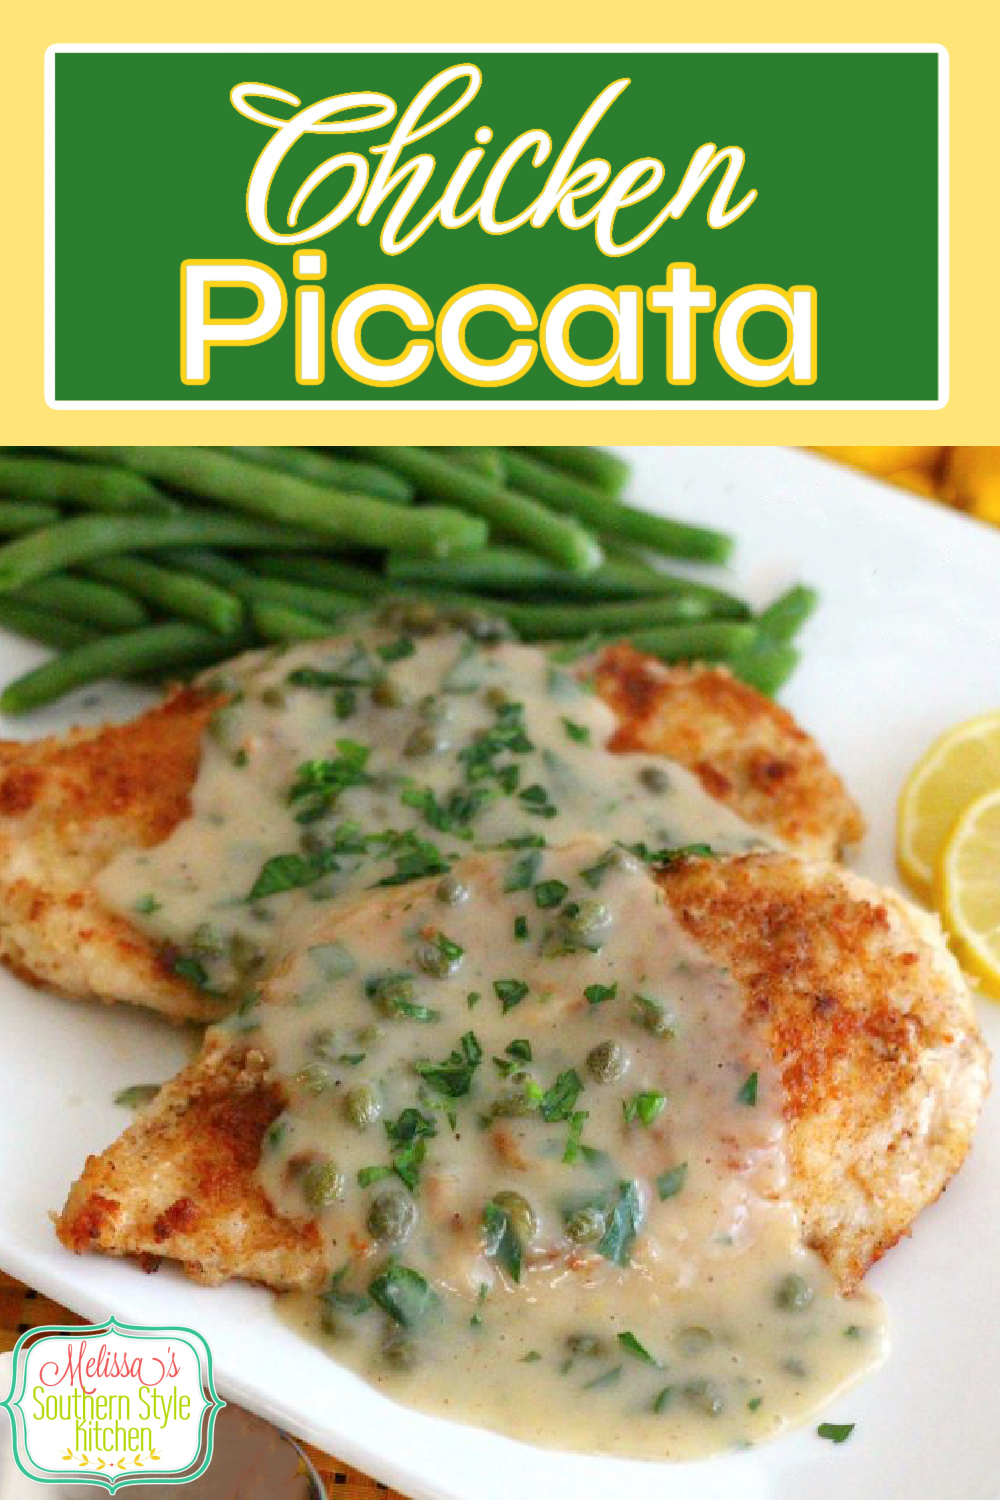 Make this easy Chicken Piccata recipe for dinner and you'll be dining on a restaurant favorite at home #chickenpiccata #chicken #easychickenrecipes #chickenbreasts #Italianchicken #southernrecipes via @melissasssk